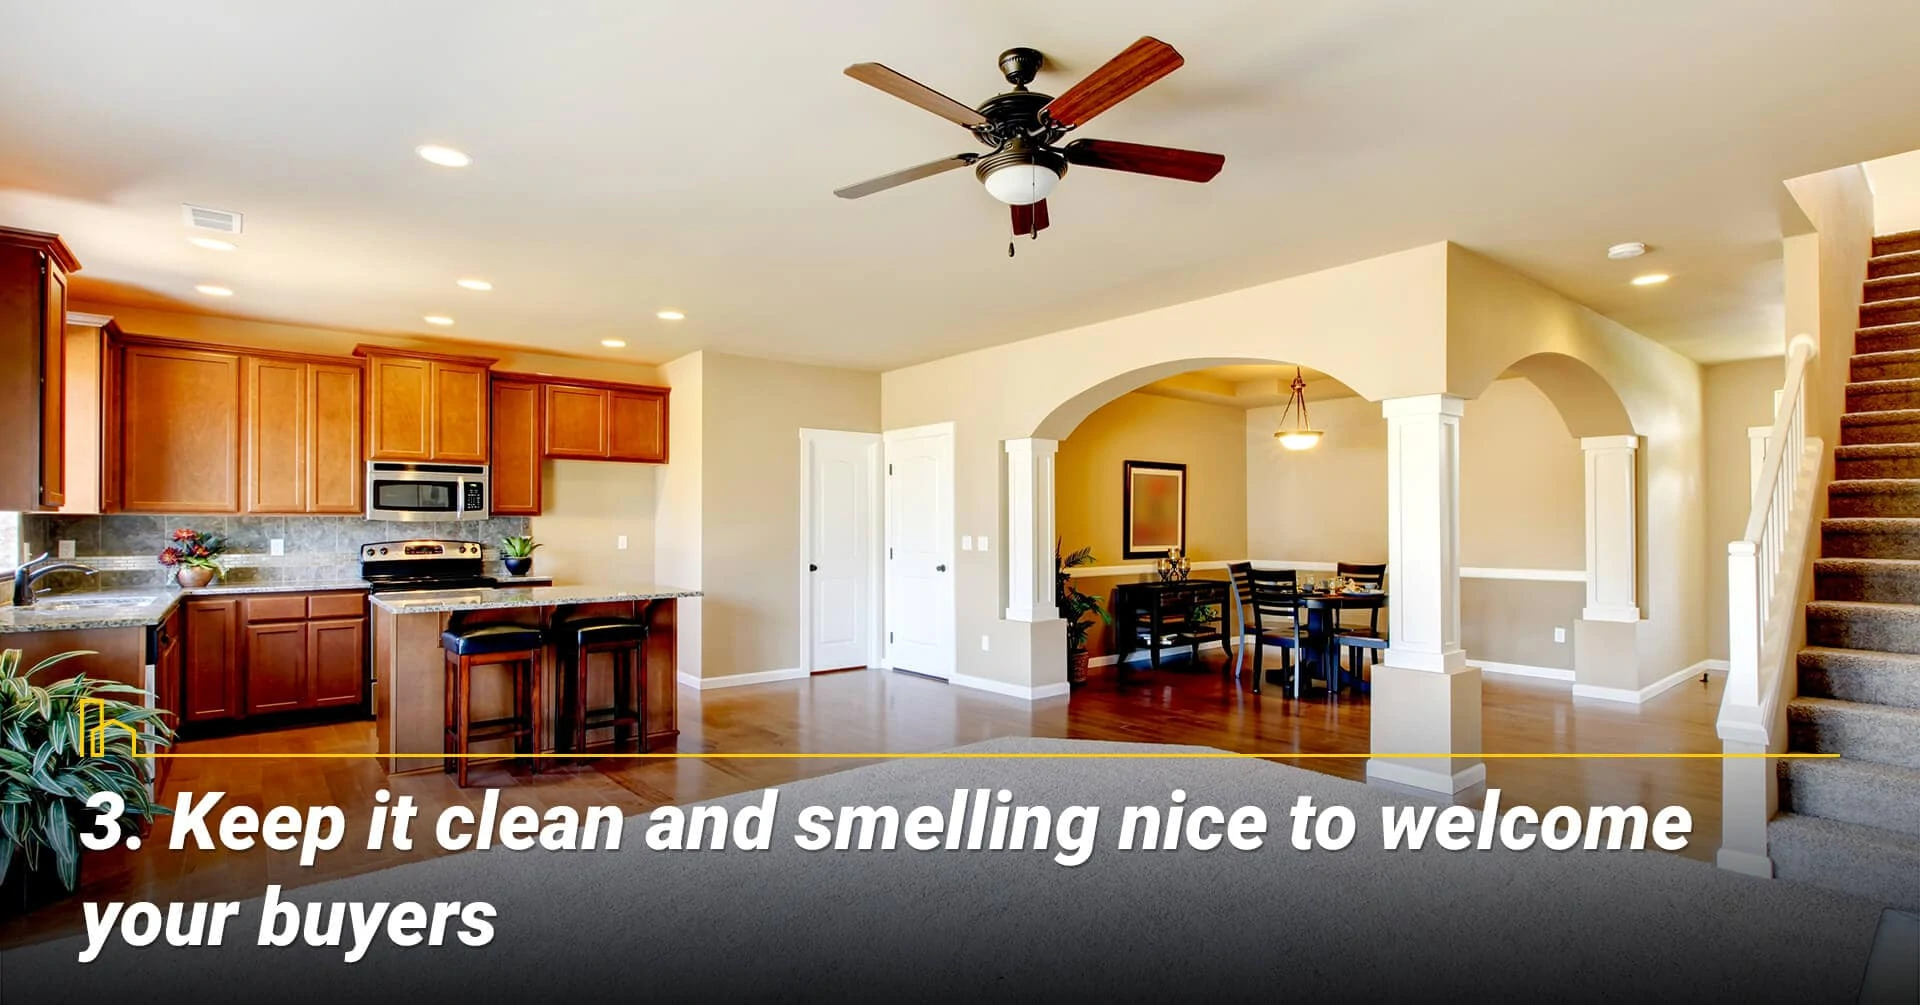 Keep it clean and smelling nice to welcome your buyers, freshen it up for potential buyers